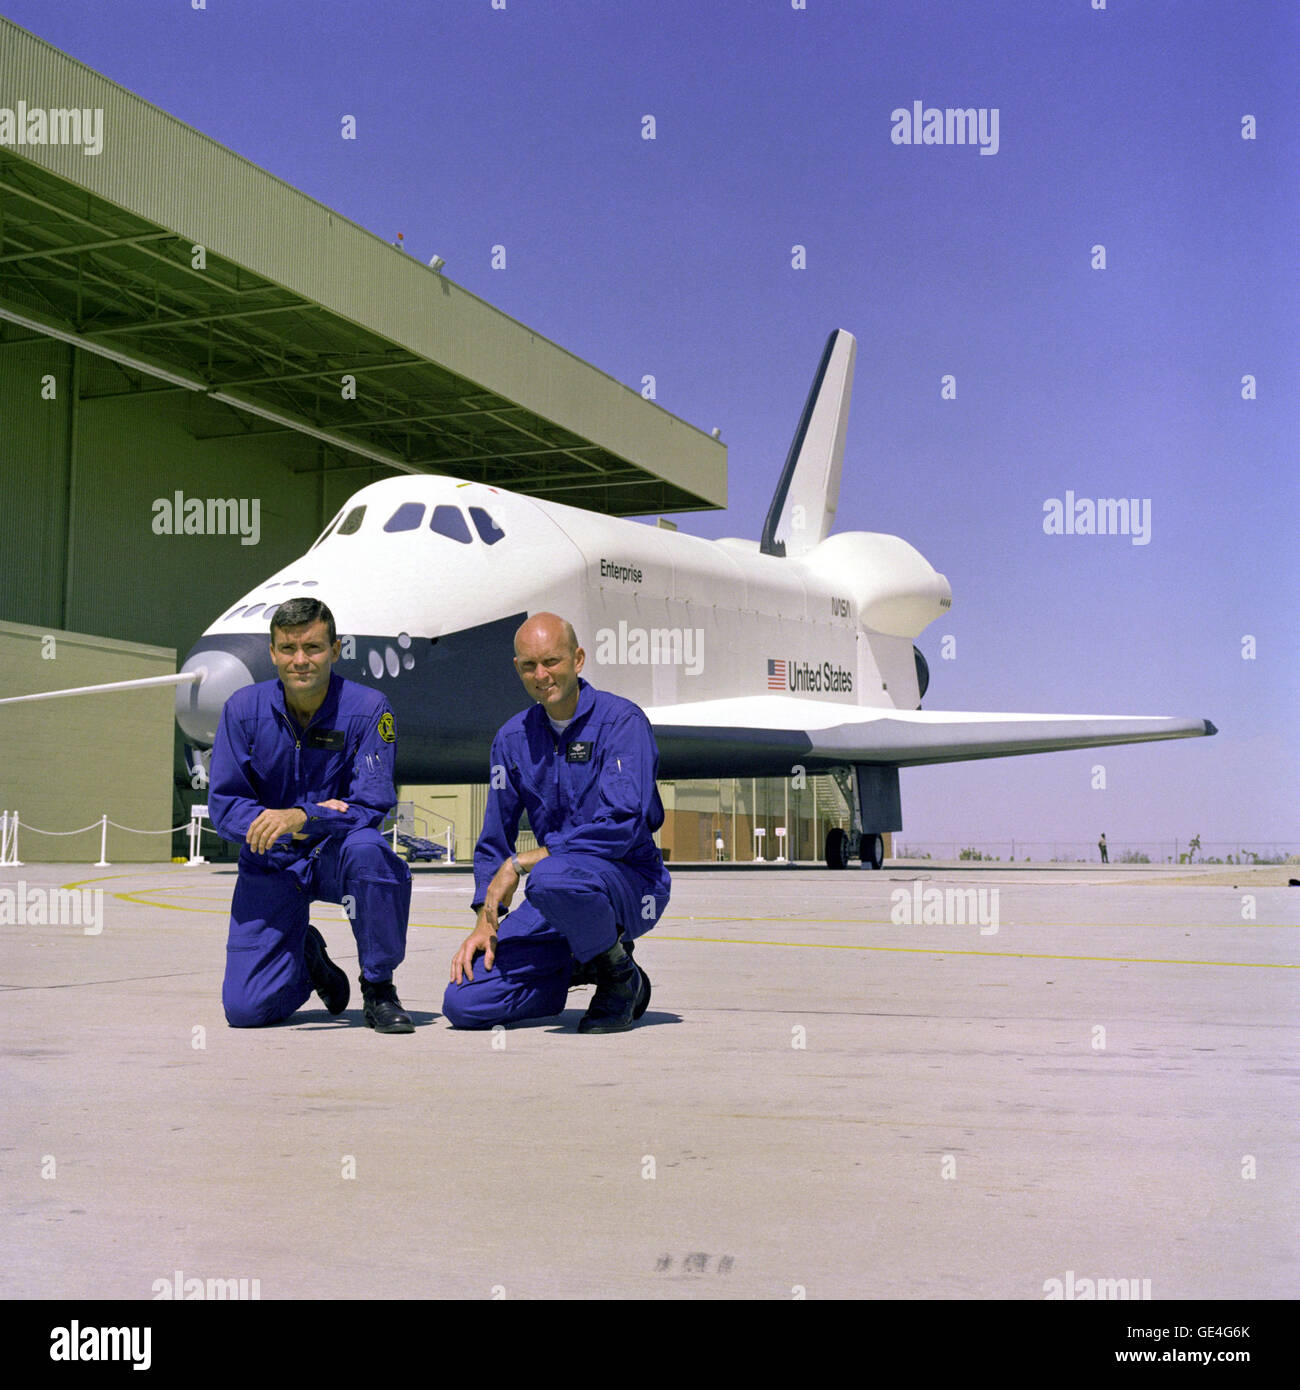 The first crew members for the Space Shuttle Approach and Landing Tests (ALT) are photographed at the Rockwell International Space Division's Orbiter Assembly Facility at Palmdale, California. The Shuttle Enterprise is Commanded by former Apollo 13 Lunar Module pilot, Fred Haise (left) with C. Gordon Fullerton as pilot. The Shuttle Orbiter Enterprise was named after the fictional Starship Enterprise from the popular 1960's television series, Star Trek.   Image # : S76-29566 Stock Photo